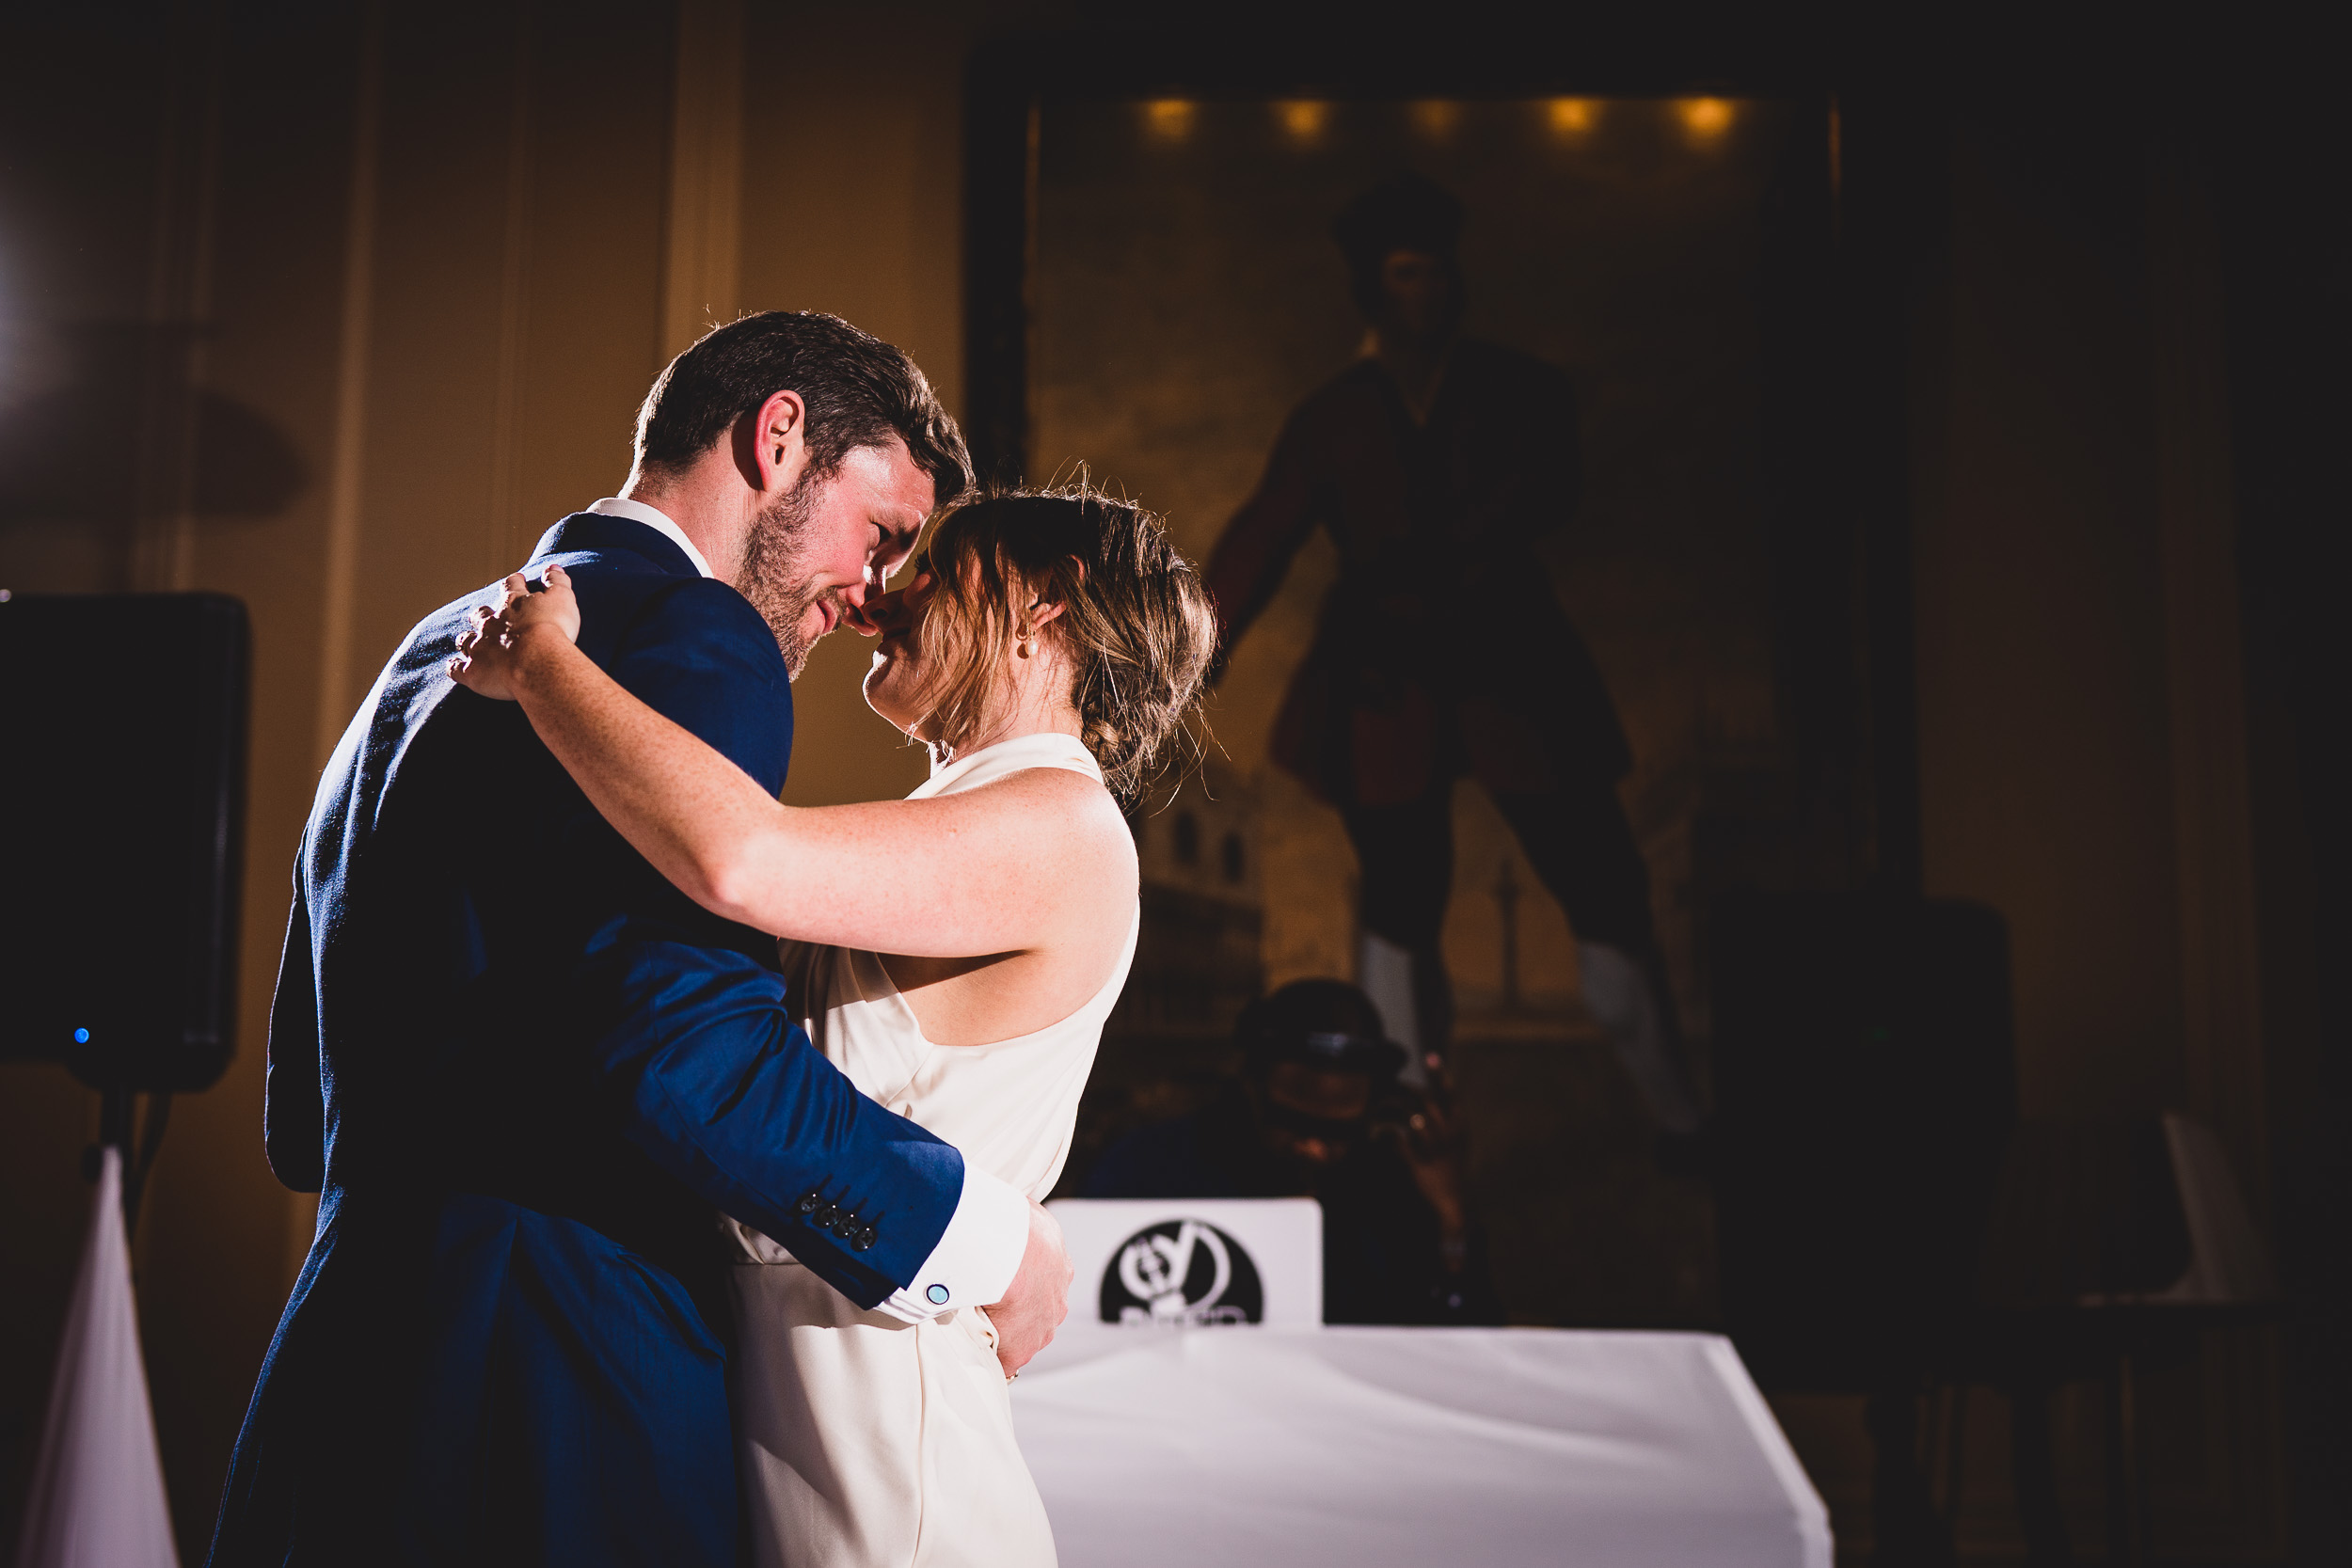 A groom and bride sharing their first dance at their wedding.